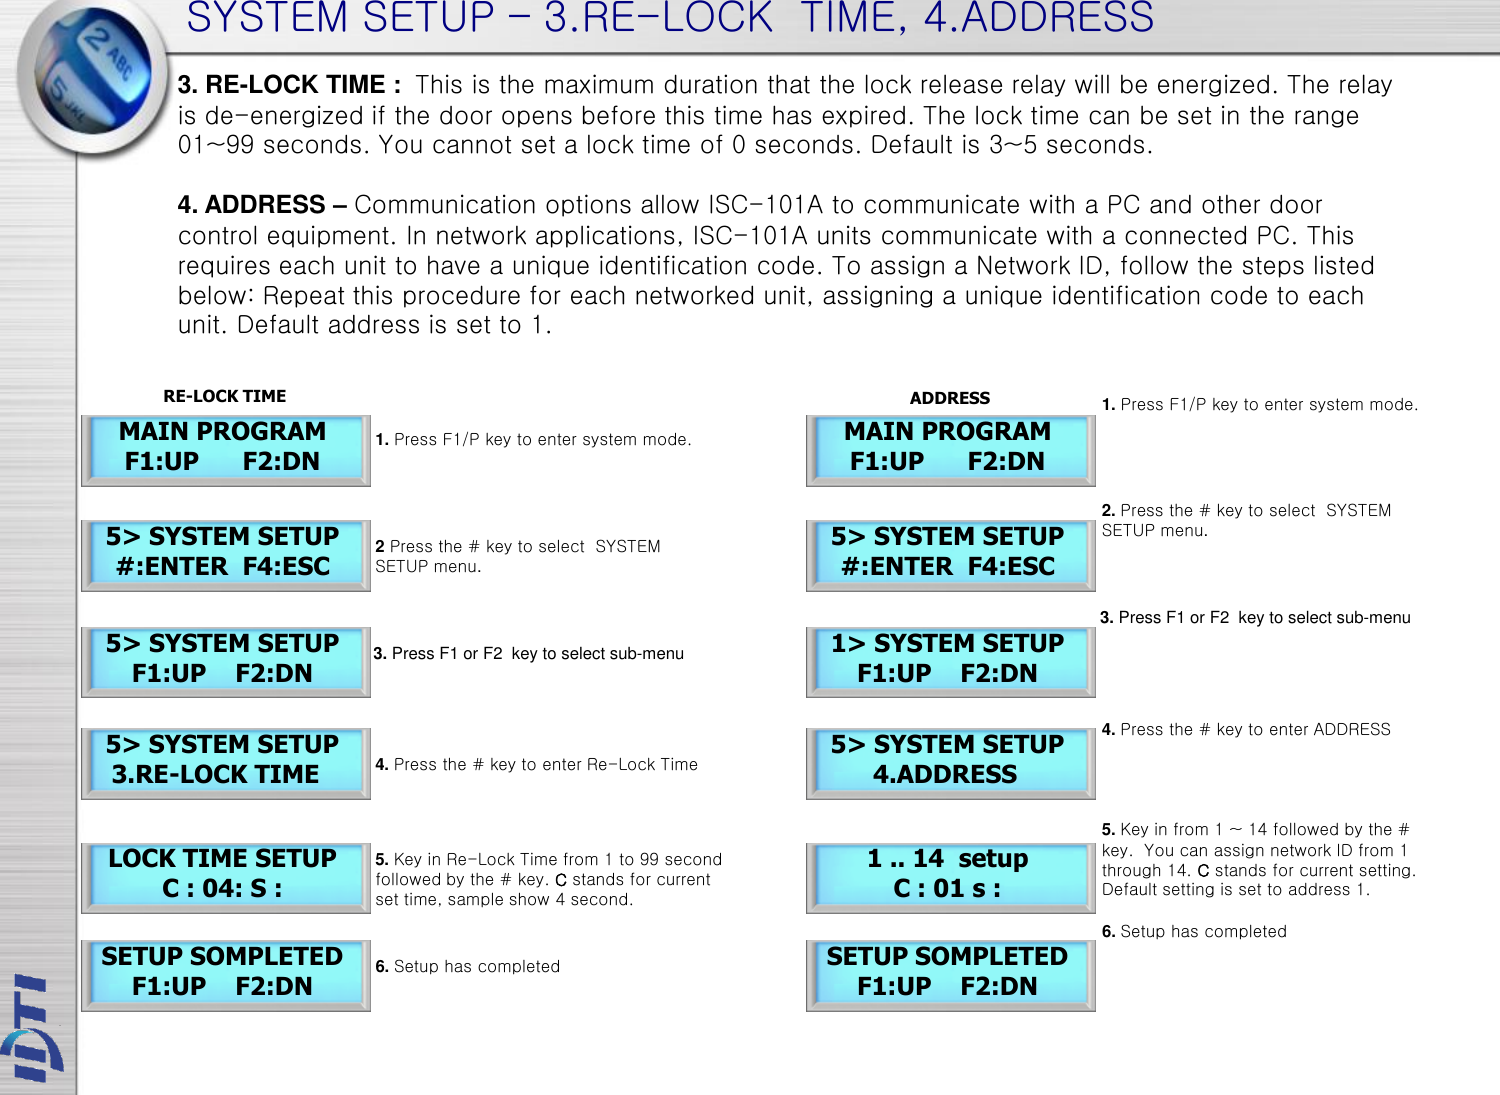 SYSTEM SETUP – 3.RE-LOCK  TIME, 4.ADDRESS 5&gt; SYSTEM SETUP    3.RE-LOCK TIME LOCK TIME SETUP C : 04: S : MAIN PROGRAM F1:UP      F2:DN 5&gt; SYSTEM SETUP #:ENTER  F4:ESC 5&gt; SYSTEM SETUP F1:UP    F2:DN SETUP SOMPLETED F1:UP    F2:DN 3. RE-LOCK TIME :  This is the maximum duration that the lock release relay will be energized. The relay is de-energized if the door opens before this time has expired. The lock time can be set in the range 01~99 seconds. You cannot set a lock time of 0 seconds. Default is 3~5 seconds.  4. ADDRESS – Communication options allow ISC-101A to communicate with a PC and other door control equipment. In network applications, ISC-101A units communicate with a connected PC. This requires each unit to have a unique identification code. To assign a Network ID, follow the steps listed below: Repeat this procedure for each networked unit, assigning a unique identification code to each unit. Default address is set to 1. 5&gt; SYSTEM SETUP         4.ADDRESS 1 .. 14  setup C : 01 s :  MAIN PROGRAM F1:UP      F2:DN 5&gt; SYSTEM SETUP #:ENTER  F4:ESC 1&gt; SYSTEM SETUP F1:UP    F2:DN SETUP SOMPLETED F1:UP    F2:DN RE-LOCK TIME ADDRESS 1. Press F1/P key to enter system mode. 2 Press the # key to select  SYSTEM SETUP menu. 4. Press the # key to enter Re-Lock Time 5. Key in Re-Lock Time from 1 to 99 second followed by the # key. C stands for current set time, sample show 4 second.  3. Press F1 or F2  key to select sub-menu 6. Setup has completed 1. Press F1/P key to enter system mode. 2. Press the # key to select  SYSTEM SETUP menu. 4. Press the # key to enter ADDRESS 5. Key in from 1 ~ 14 followed by the # key.  You can assign network ID from 1 through 14. C stands for current setting. Default setting is set to address 1. 3. Press F1 or F2  key to select sub-menu 6. Setup has completed 